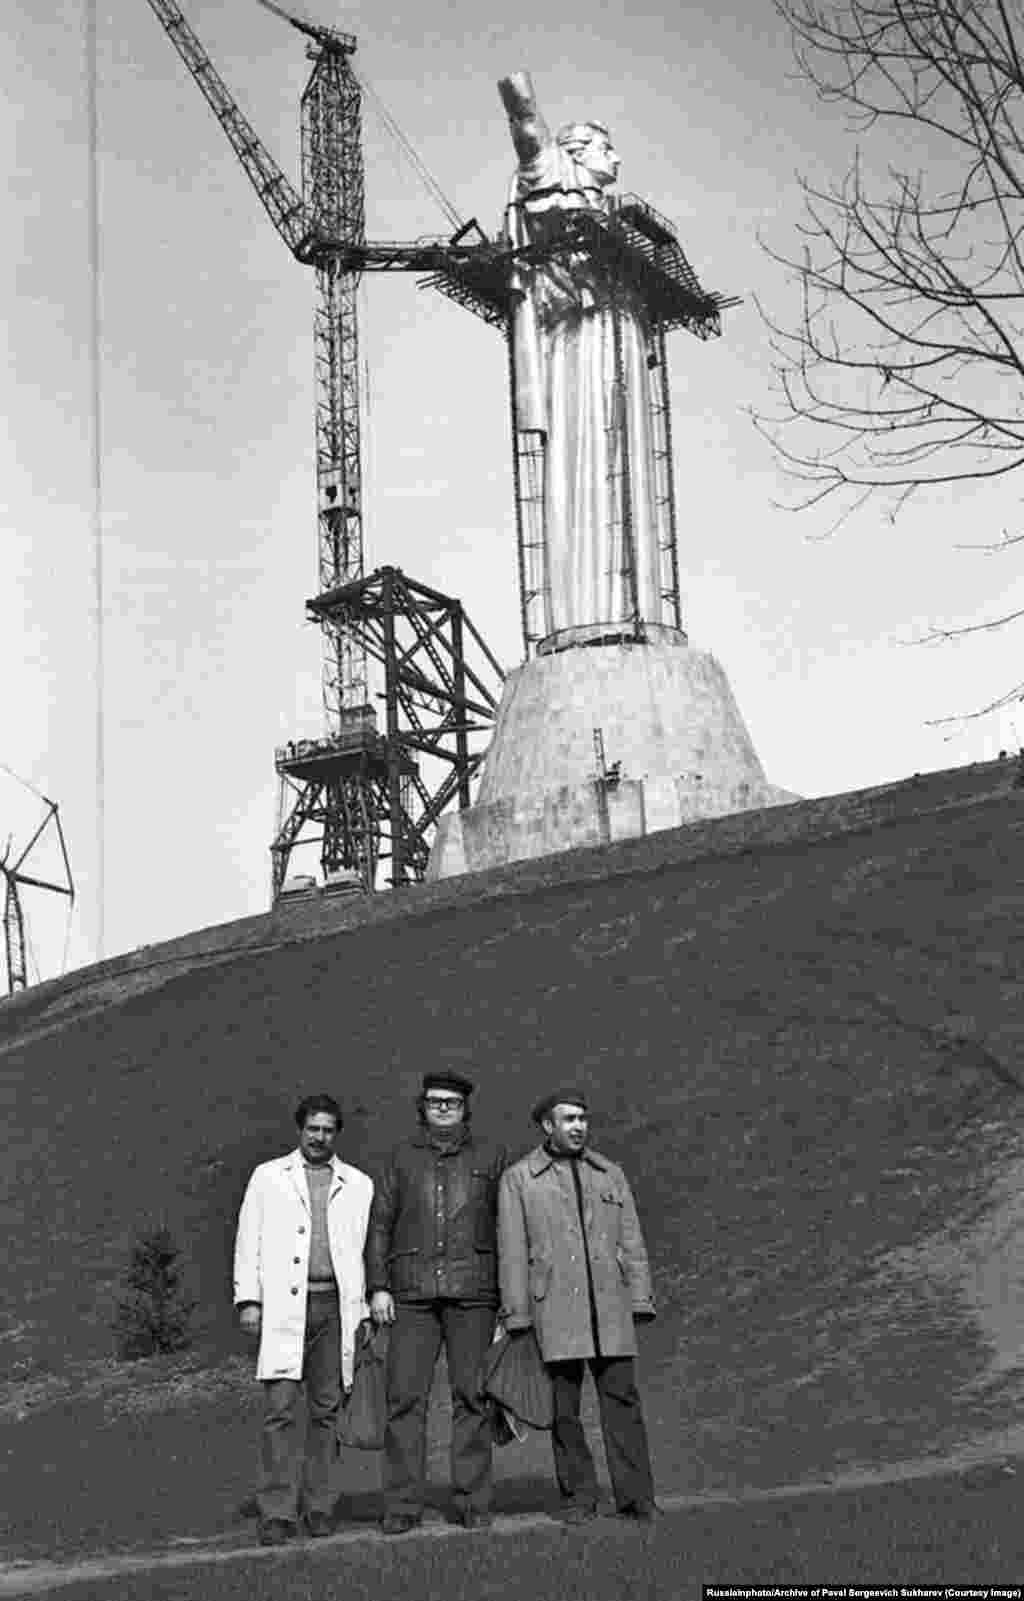 Men posing in front of the Motherland Monument during its assembly in March 1981. Construction of the steel-skinned statue began in 1979 and was completed in 1981.